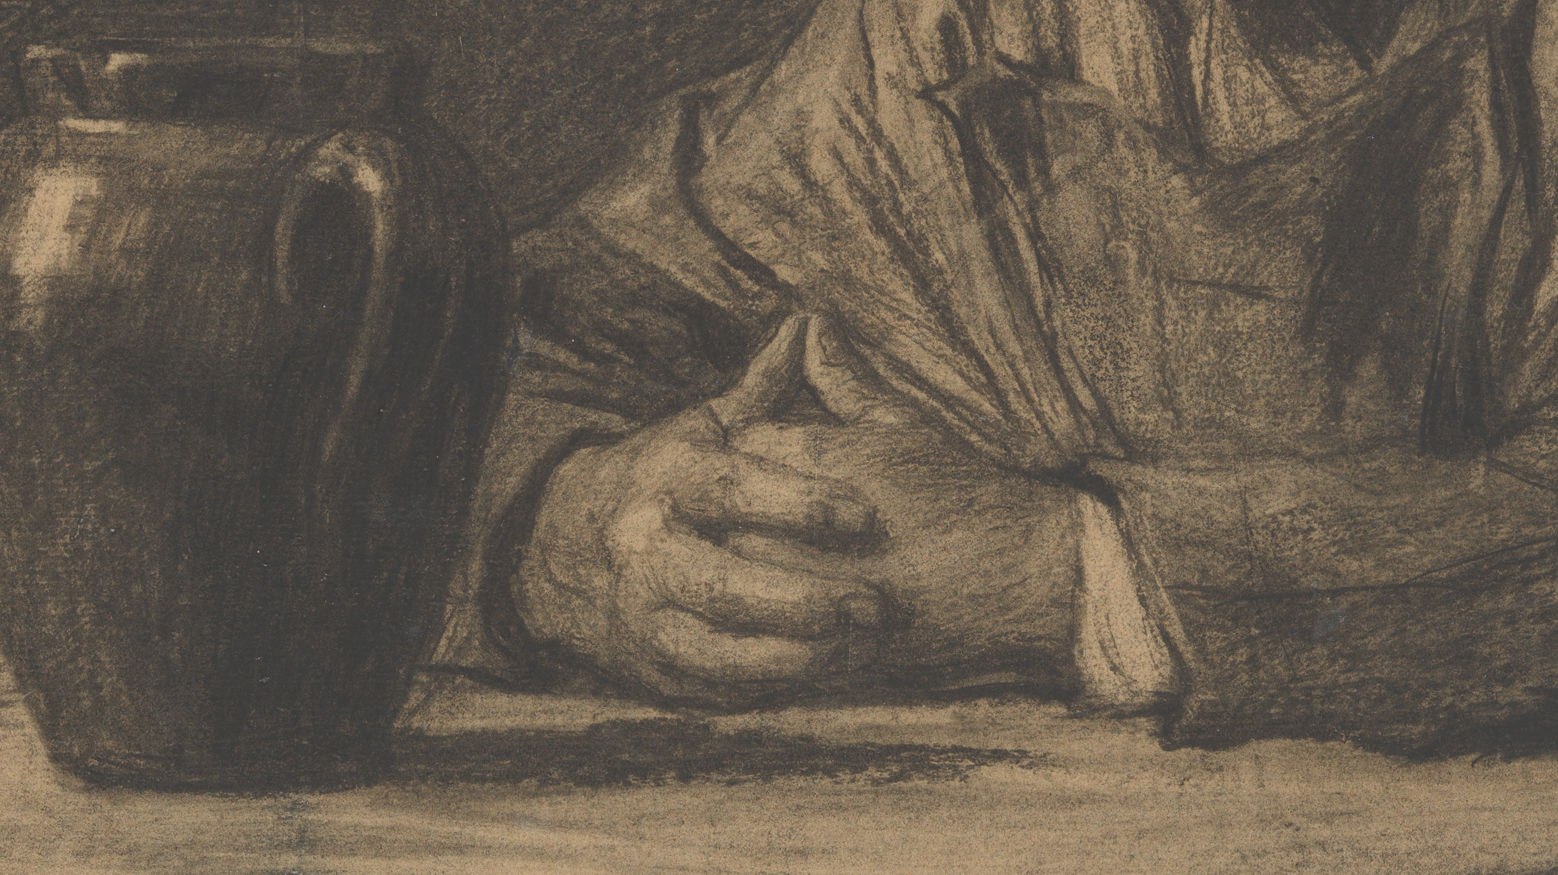 A charcoal drawing of a cloaked elderly figure seated at a table with a vase on it.